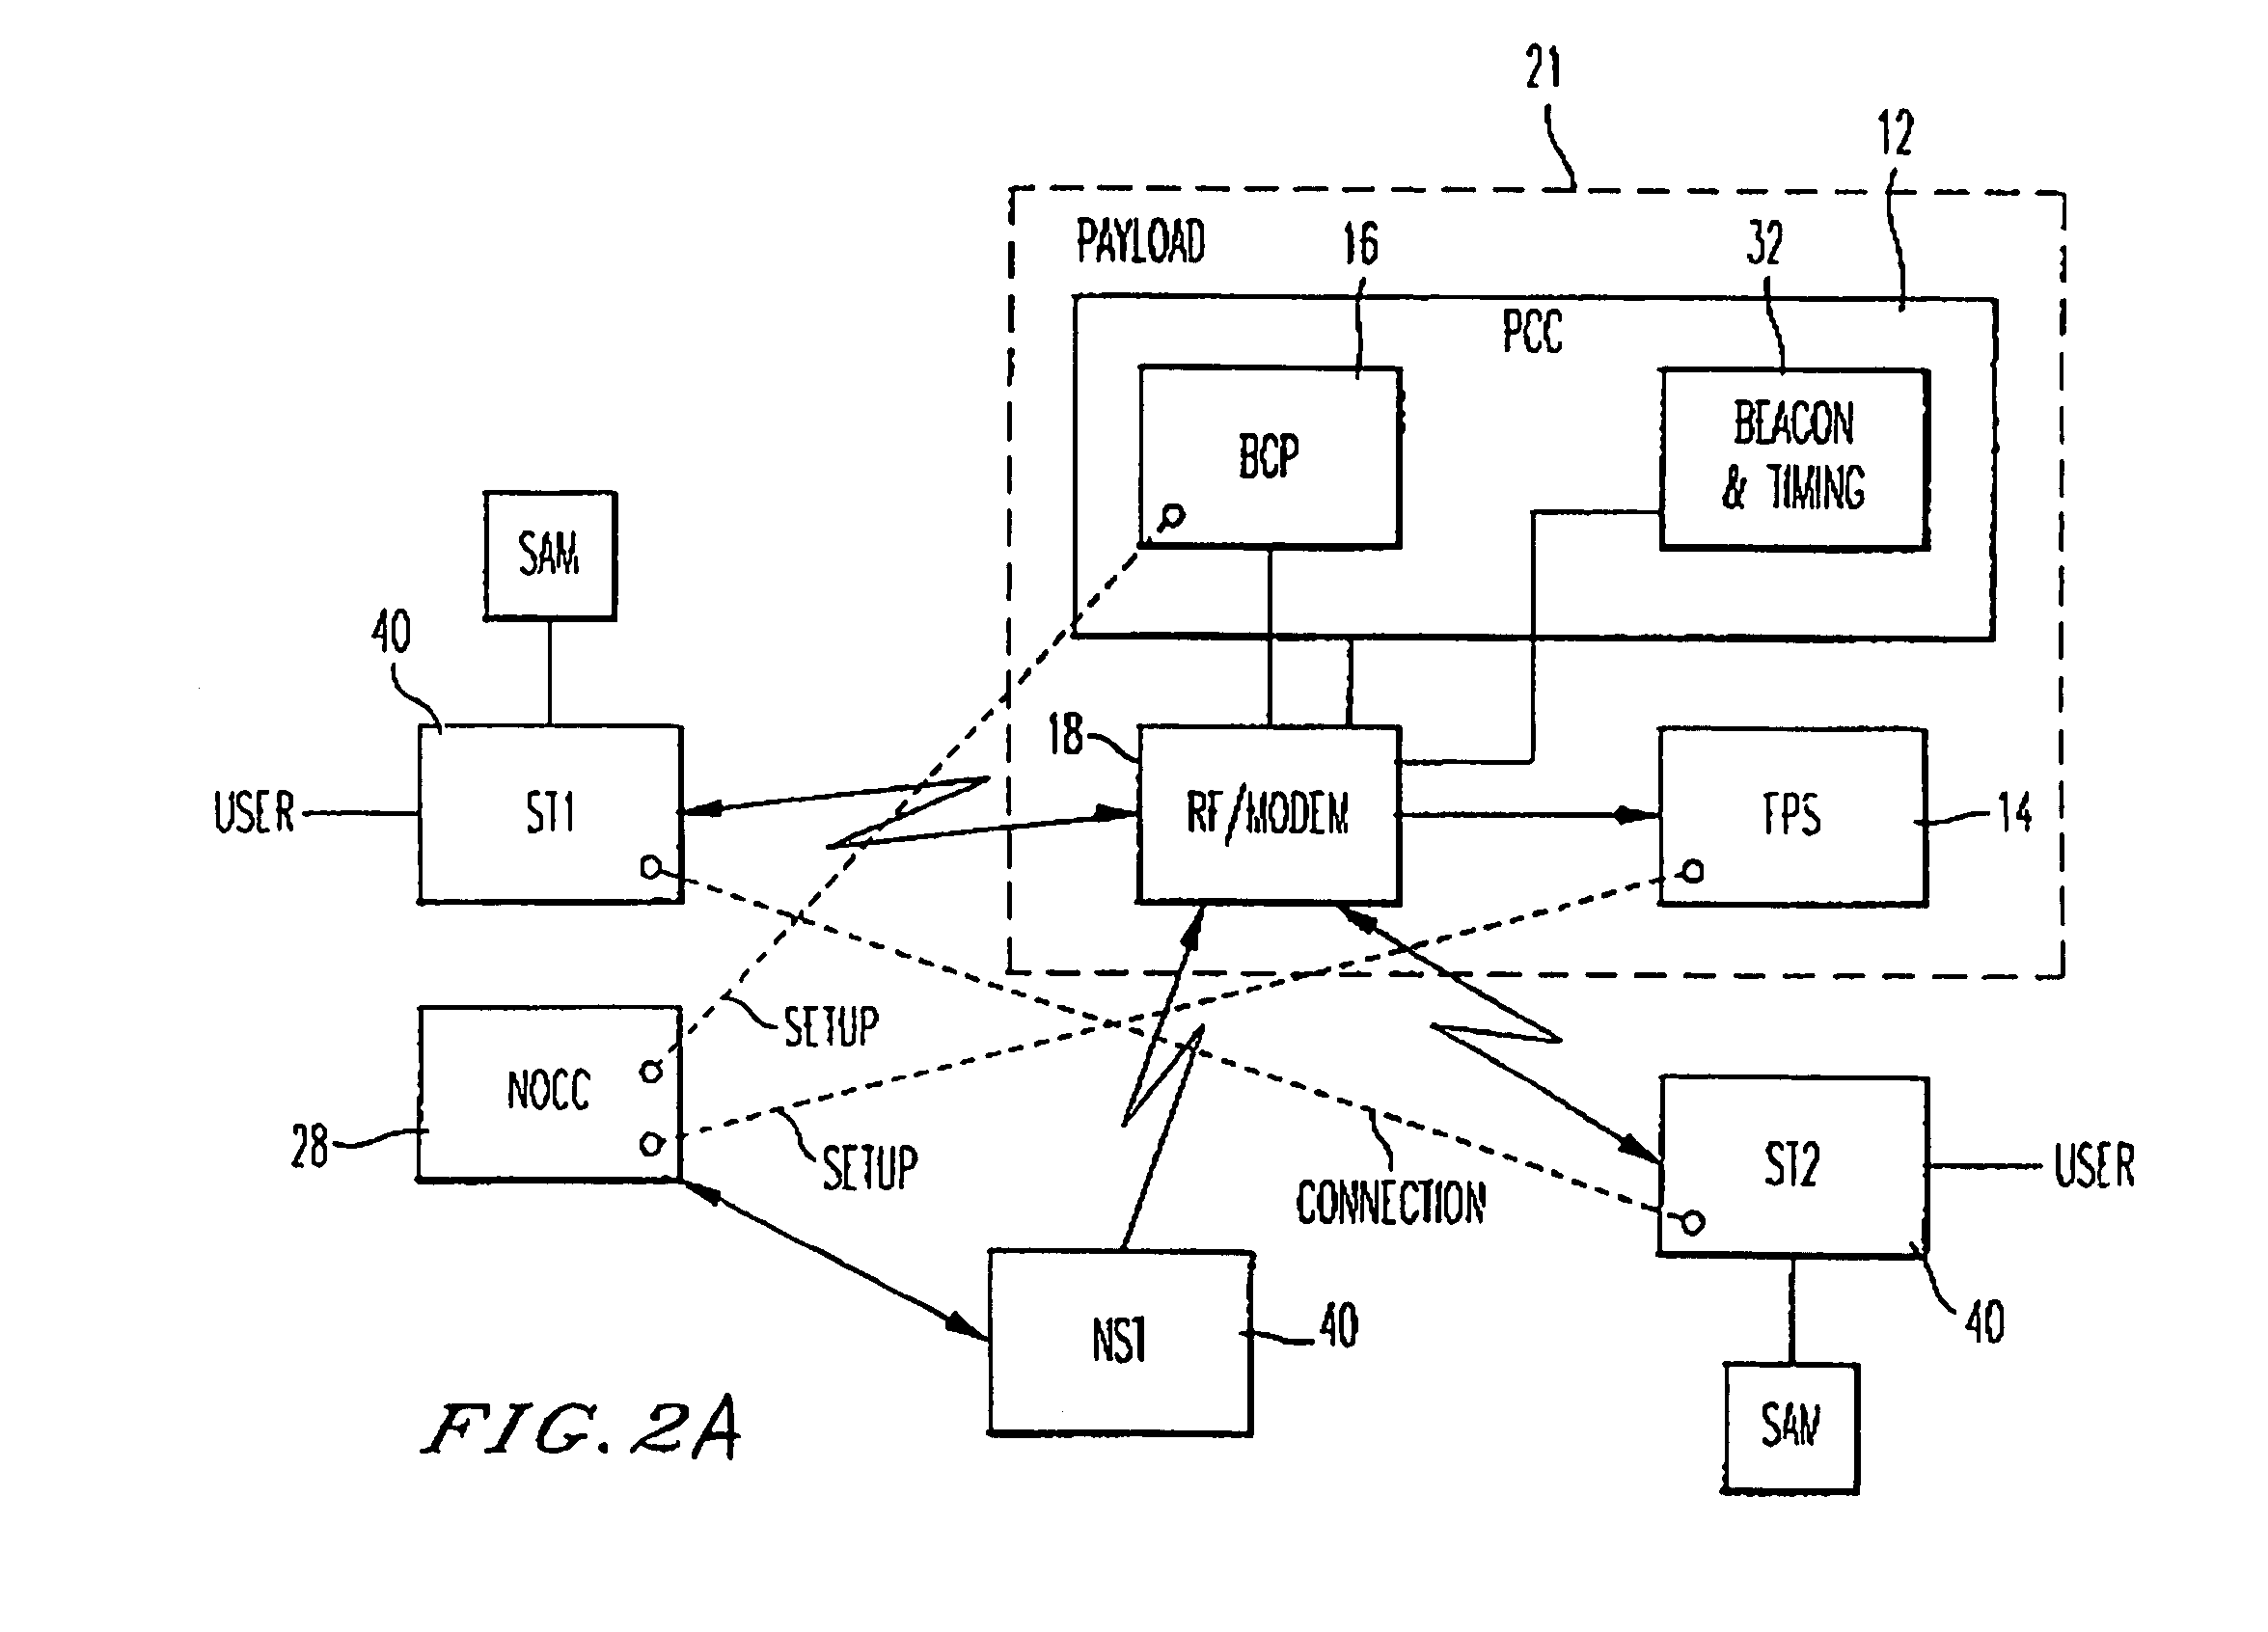 Method and system for providing satellite bandwidth on demand using multi-level queuing